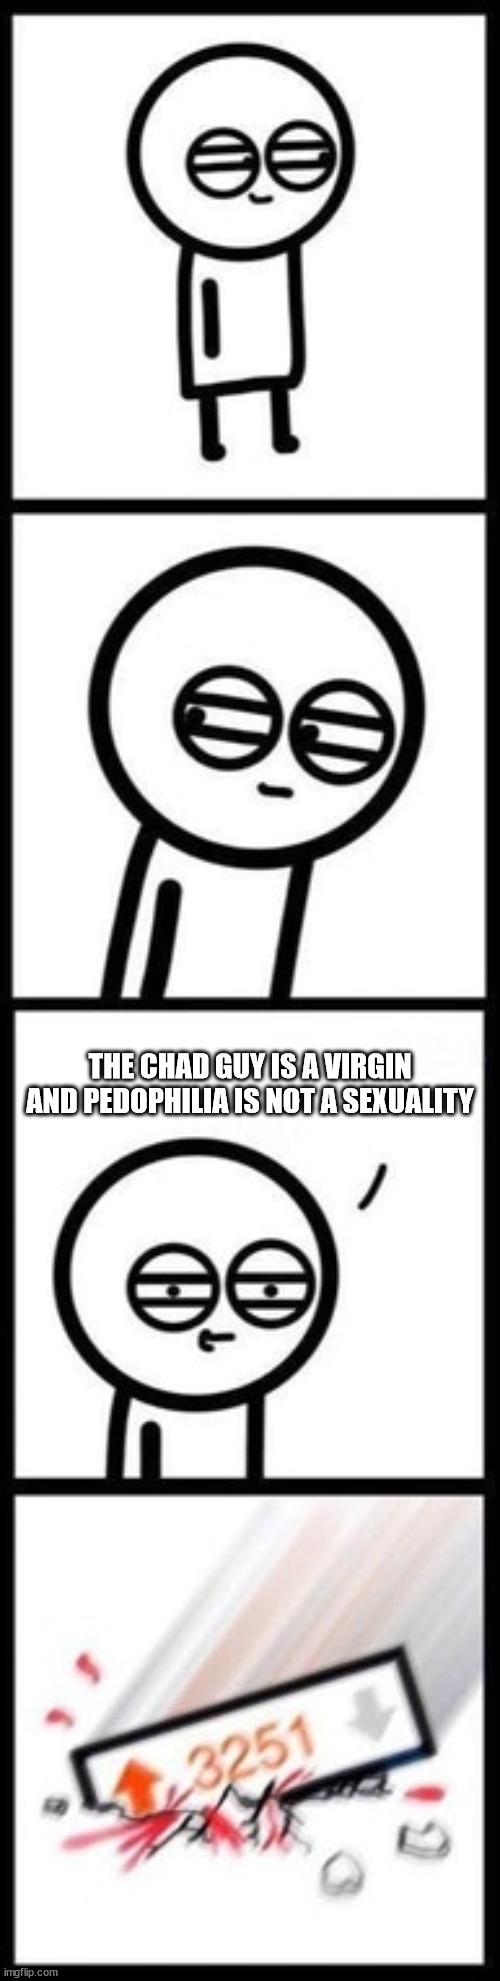 3251 upvotes | THE CHAD GUY IS A VIRGIN AND PEDOPHILIA IS NOT A SEXUALITY | image tagged in 3251 upvotes,memes | made w/ Imgflip meme maker